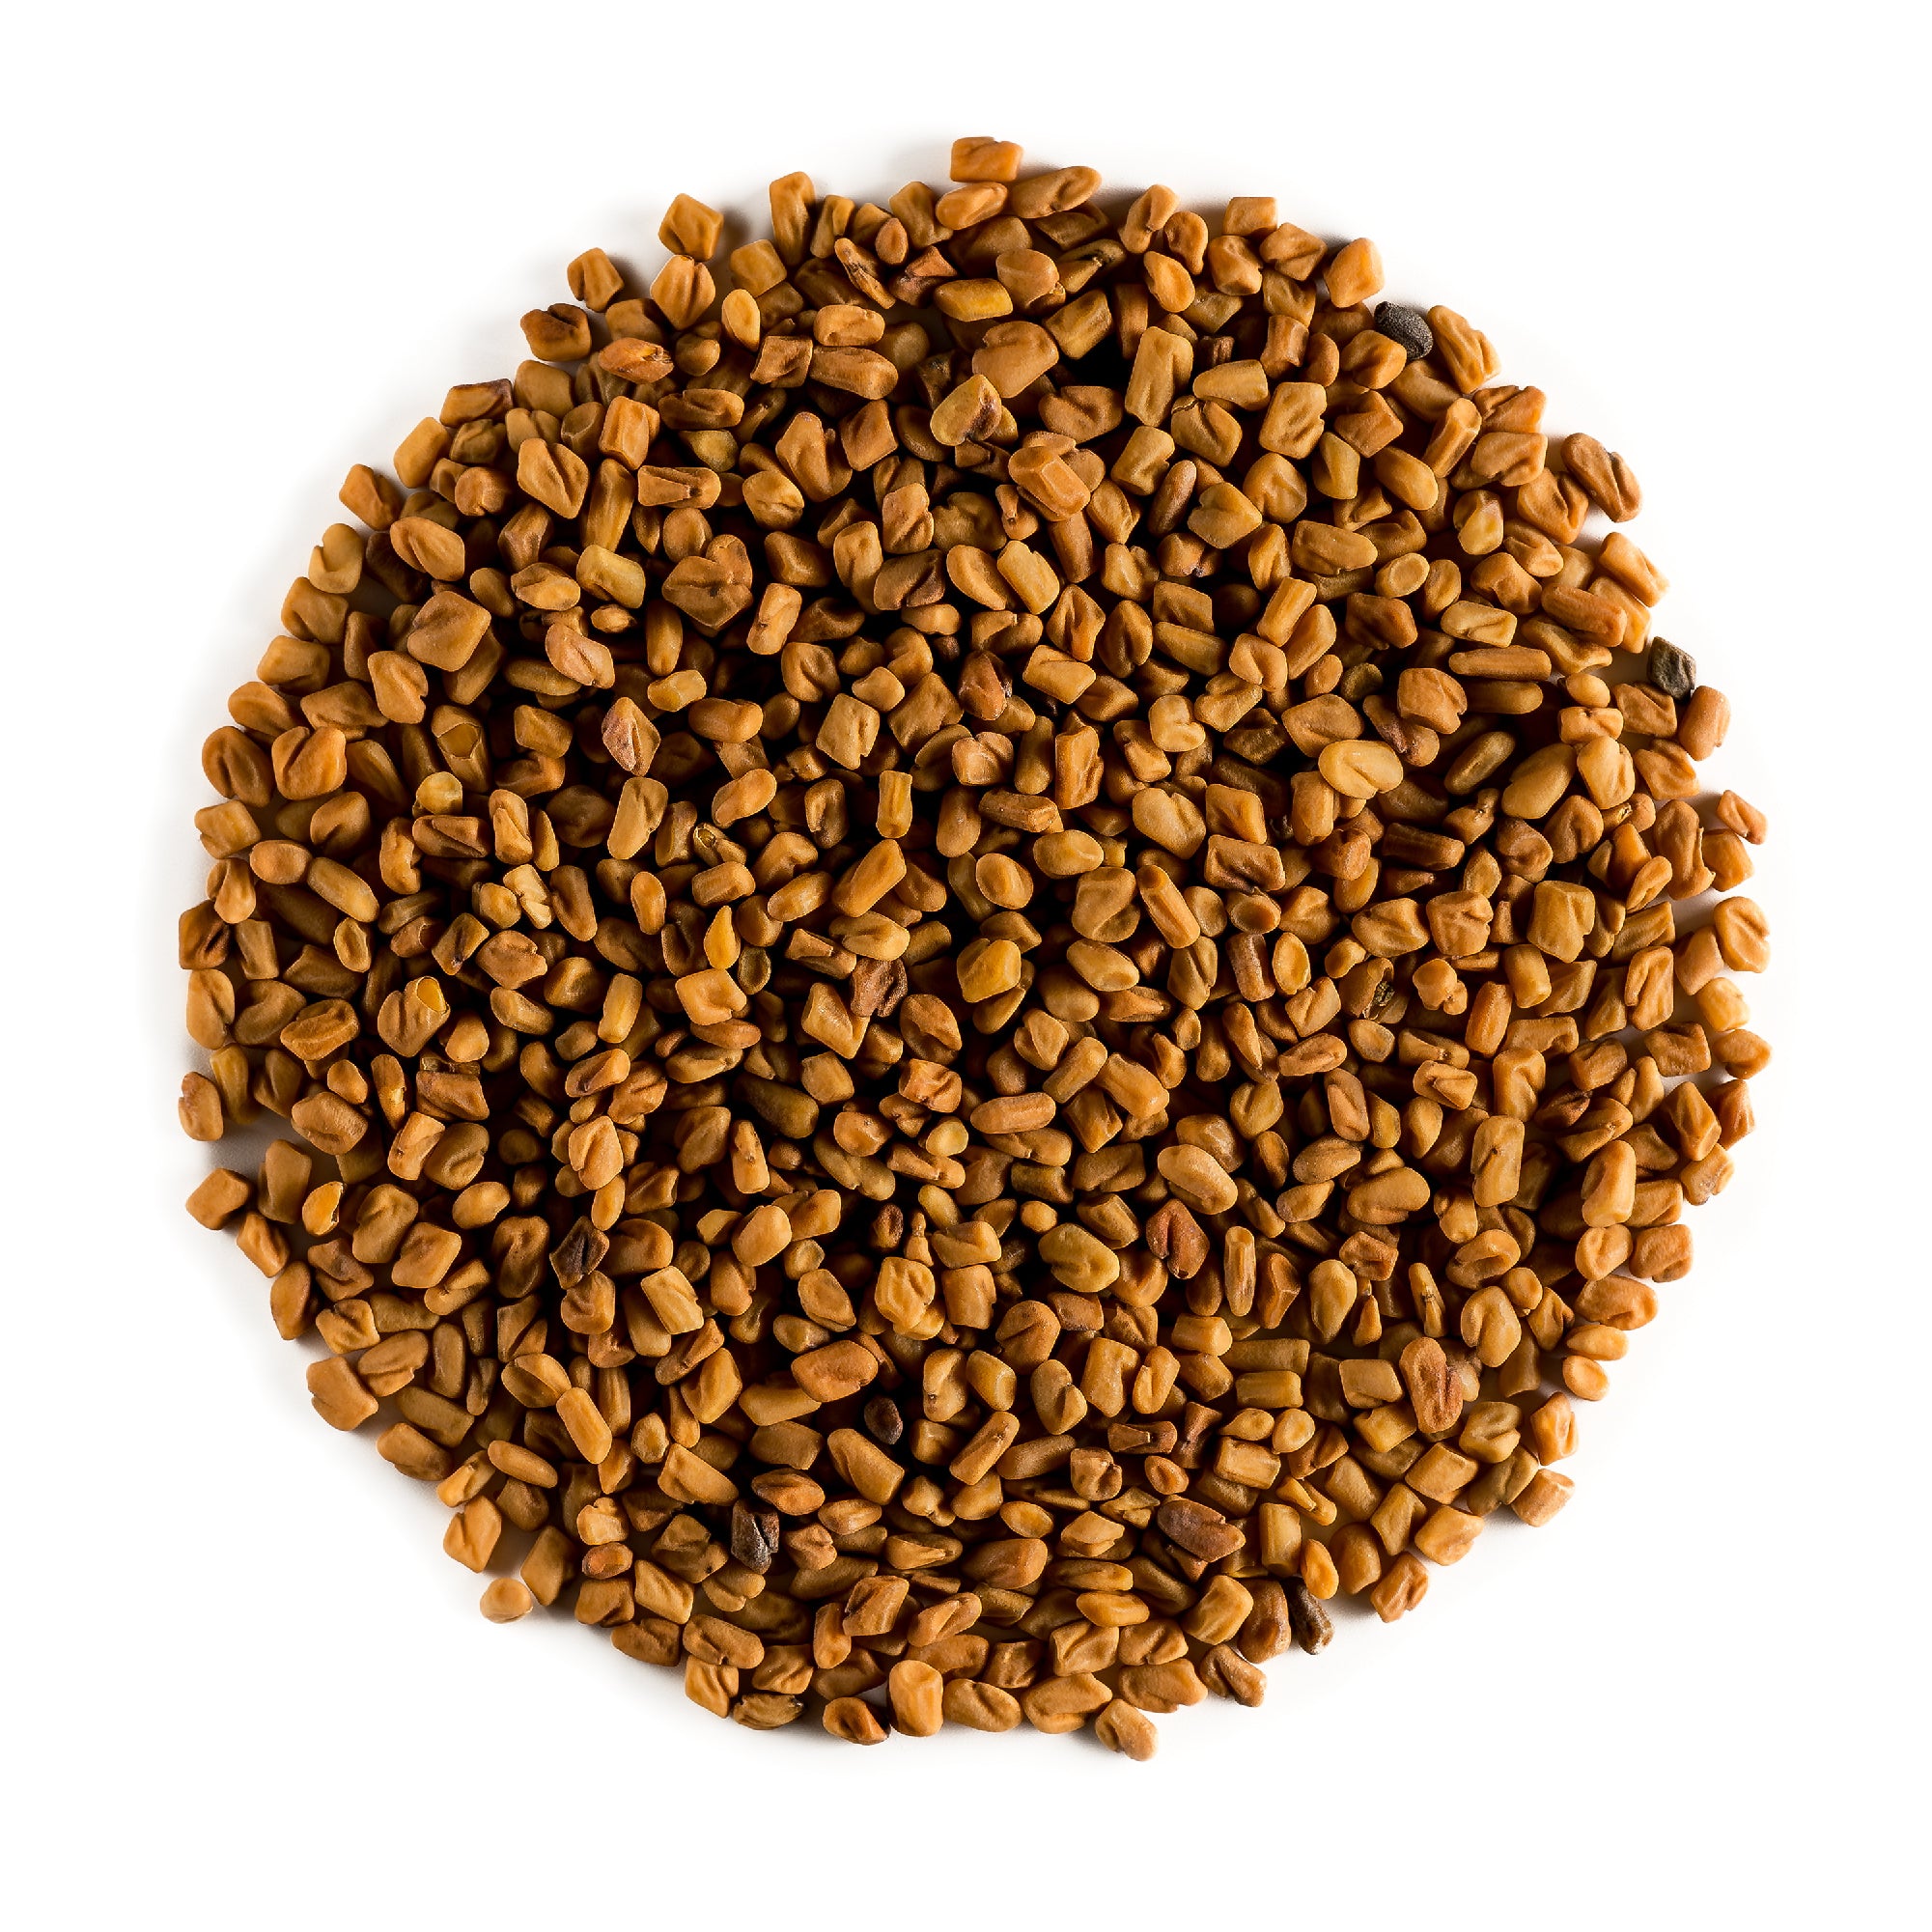 Buy Fenugreek oil-Virgin- Organic with same day delivery at MarchesTAU